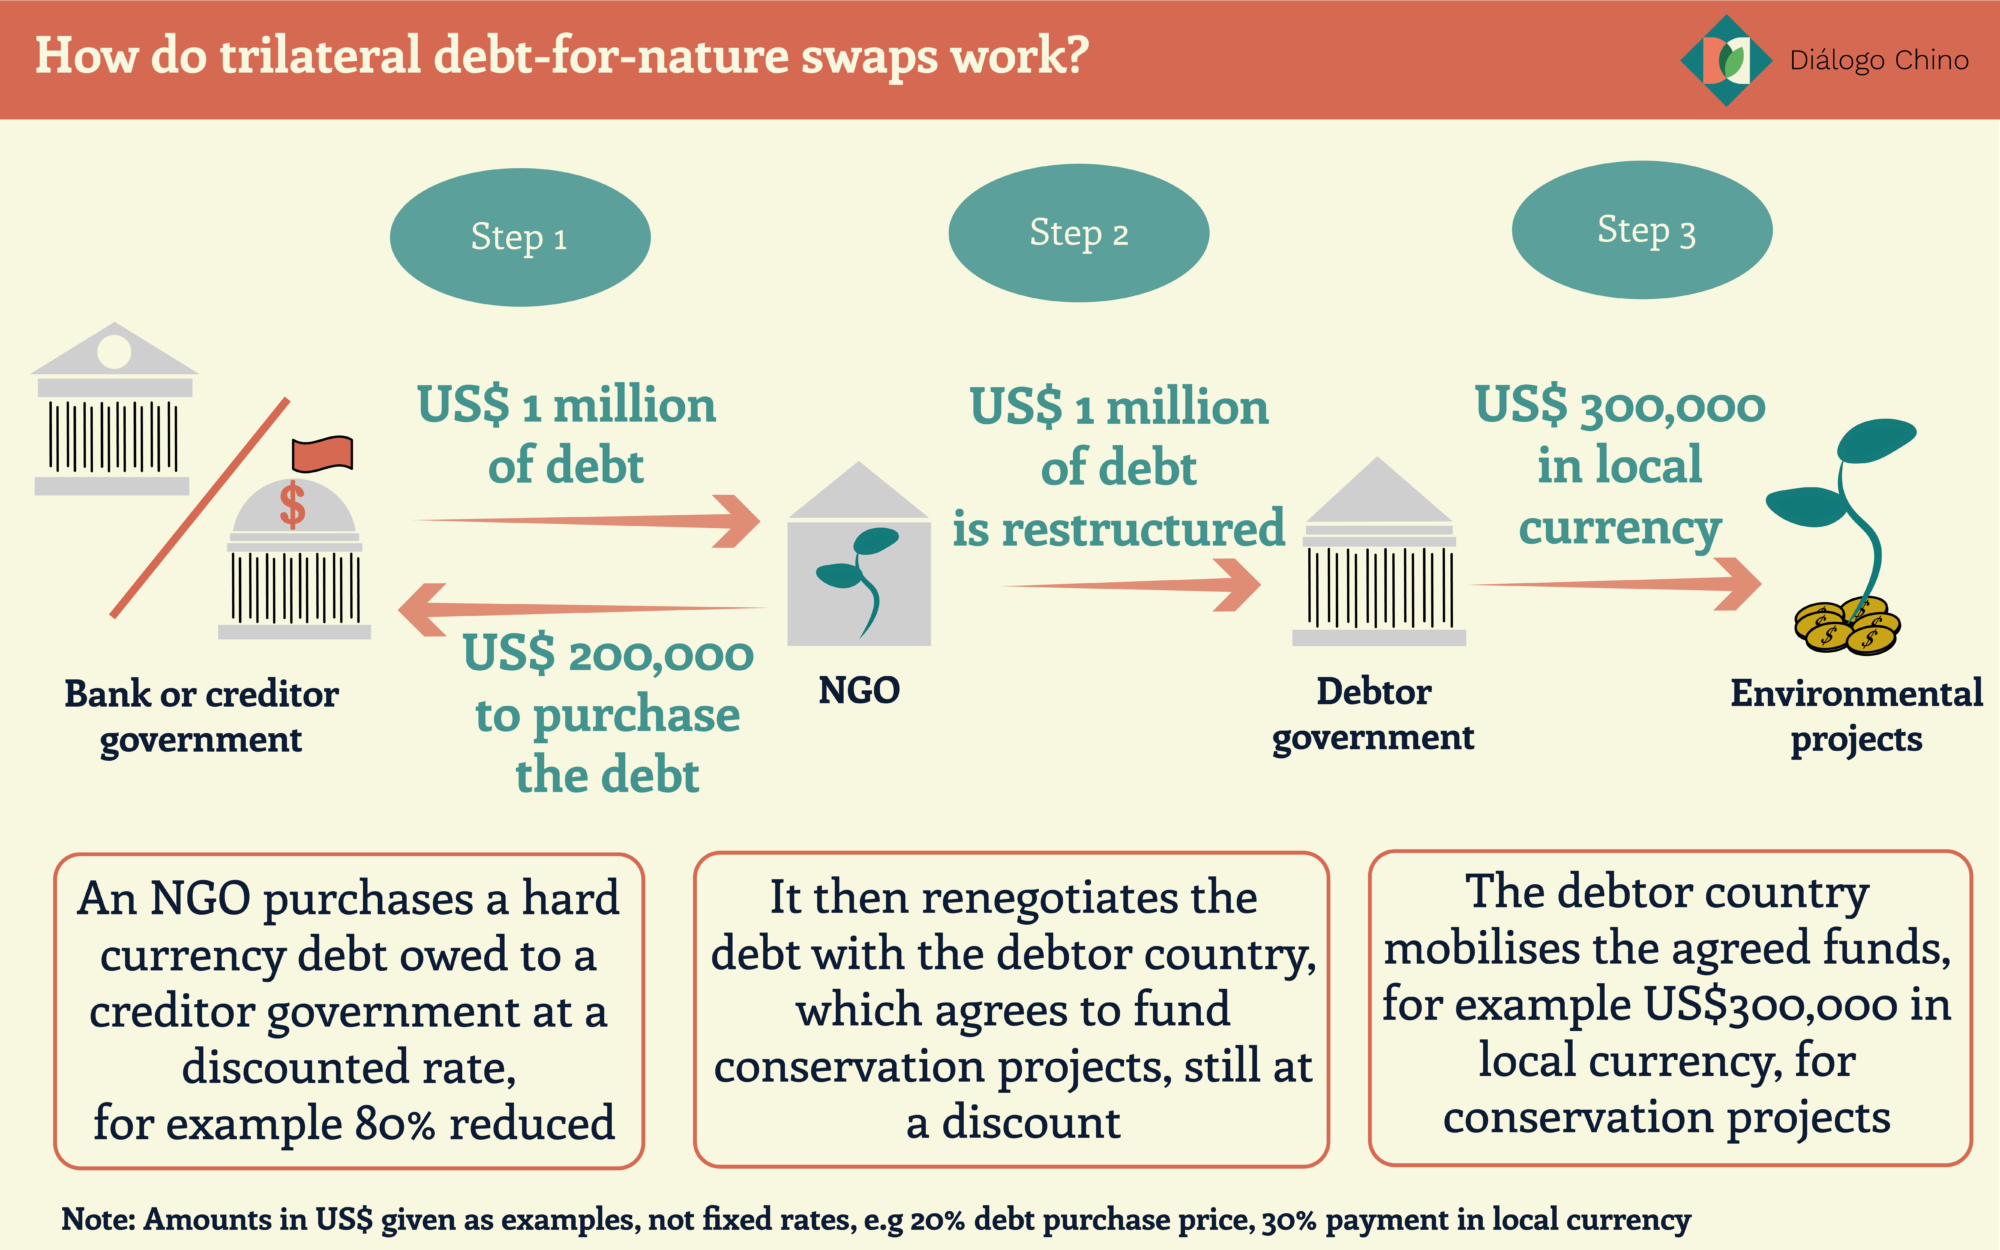 chart showing how trilateral debt swaps for nature work